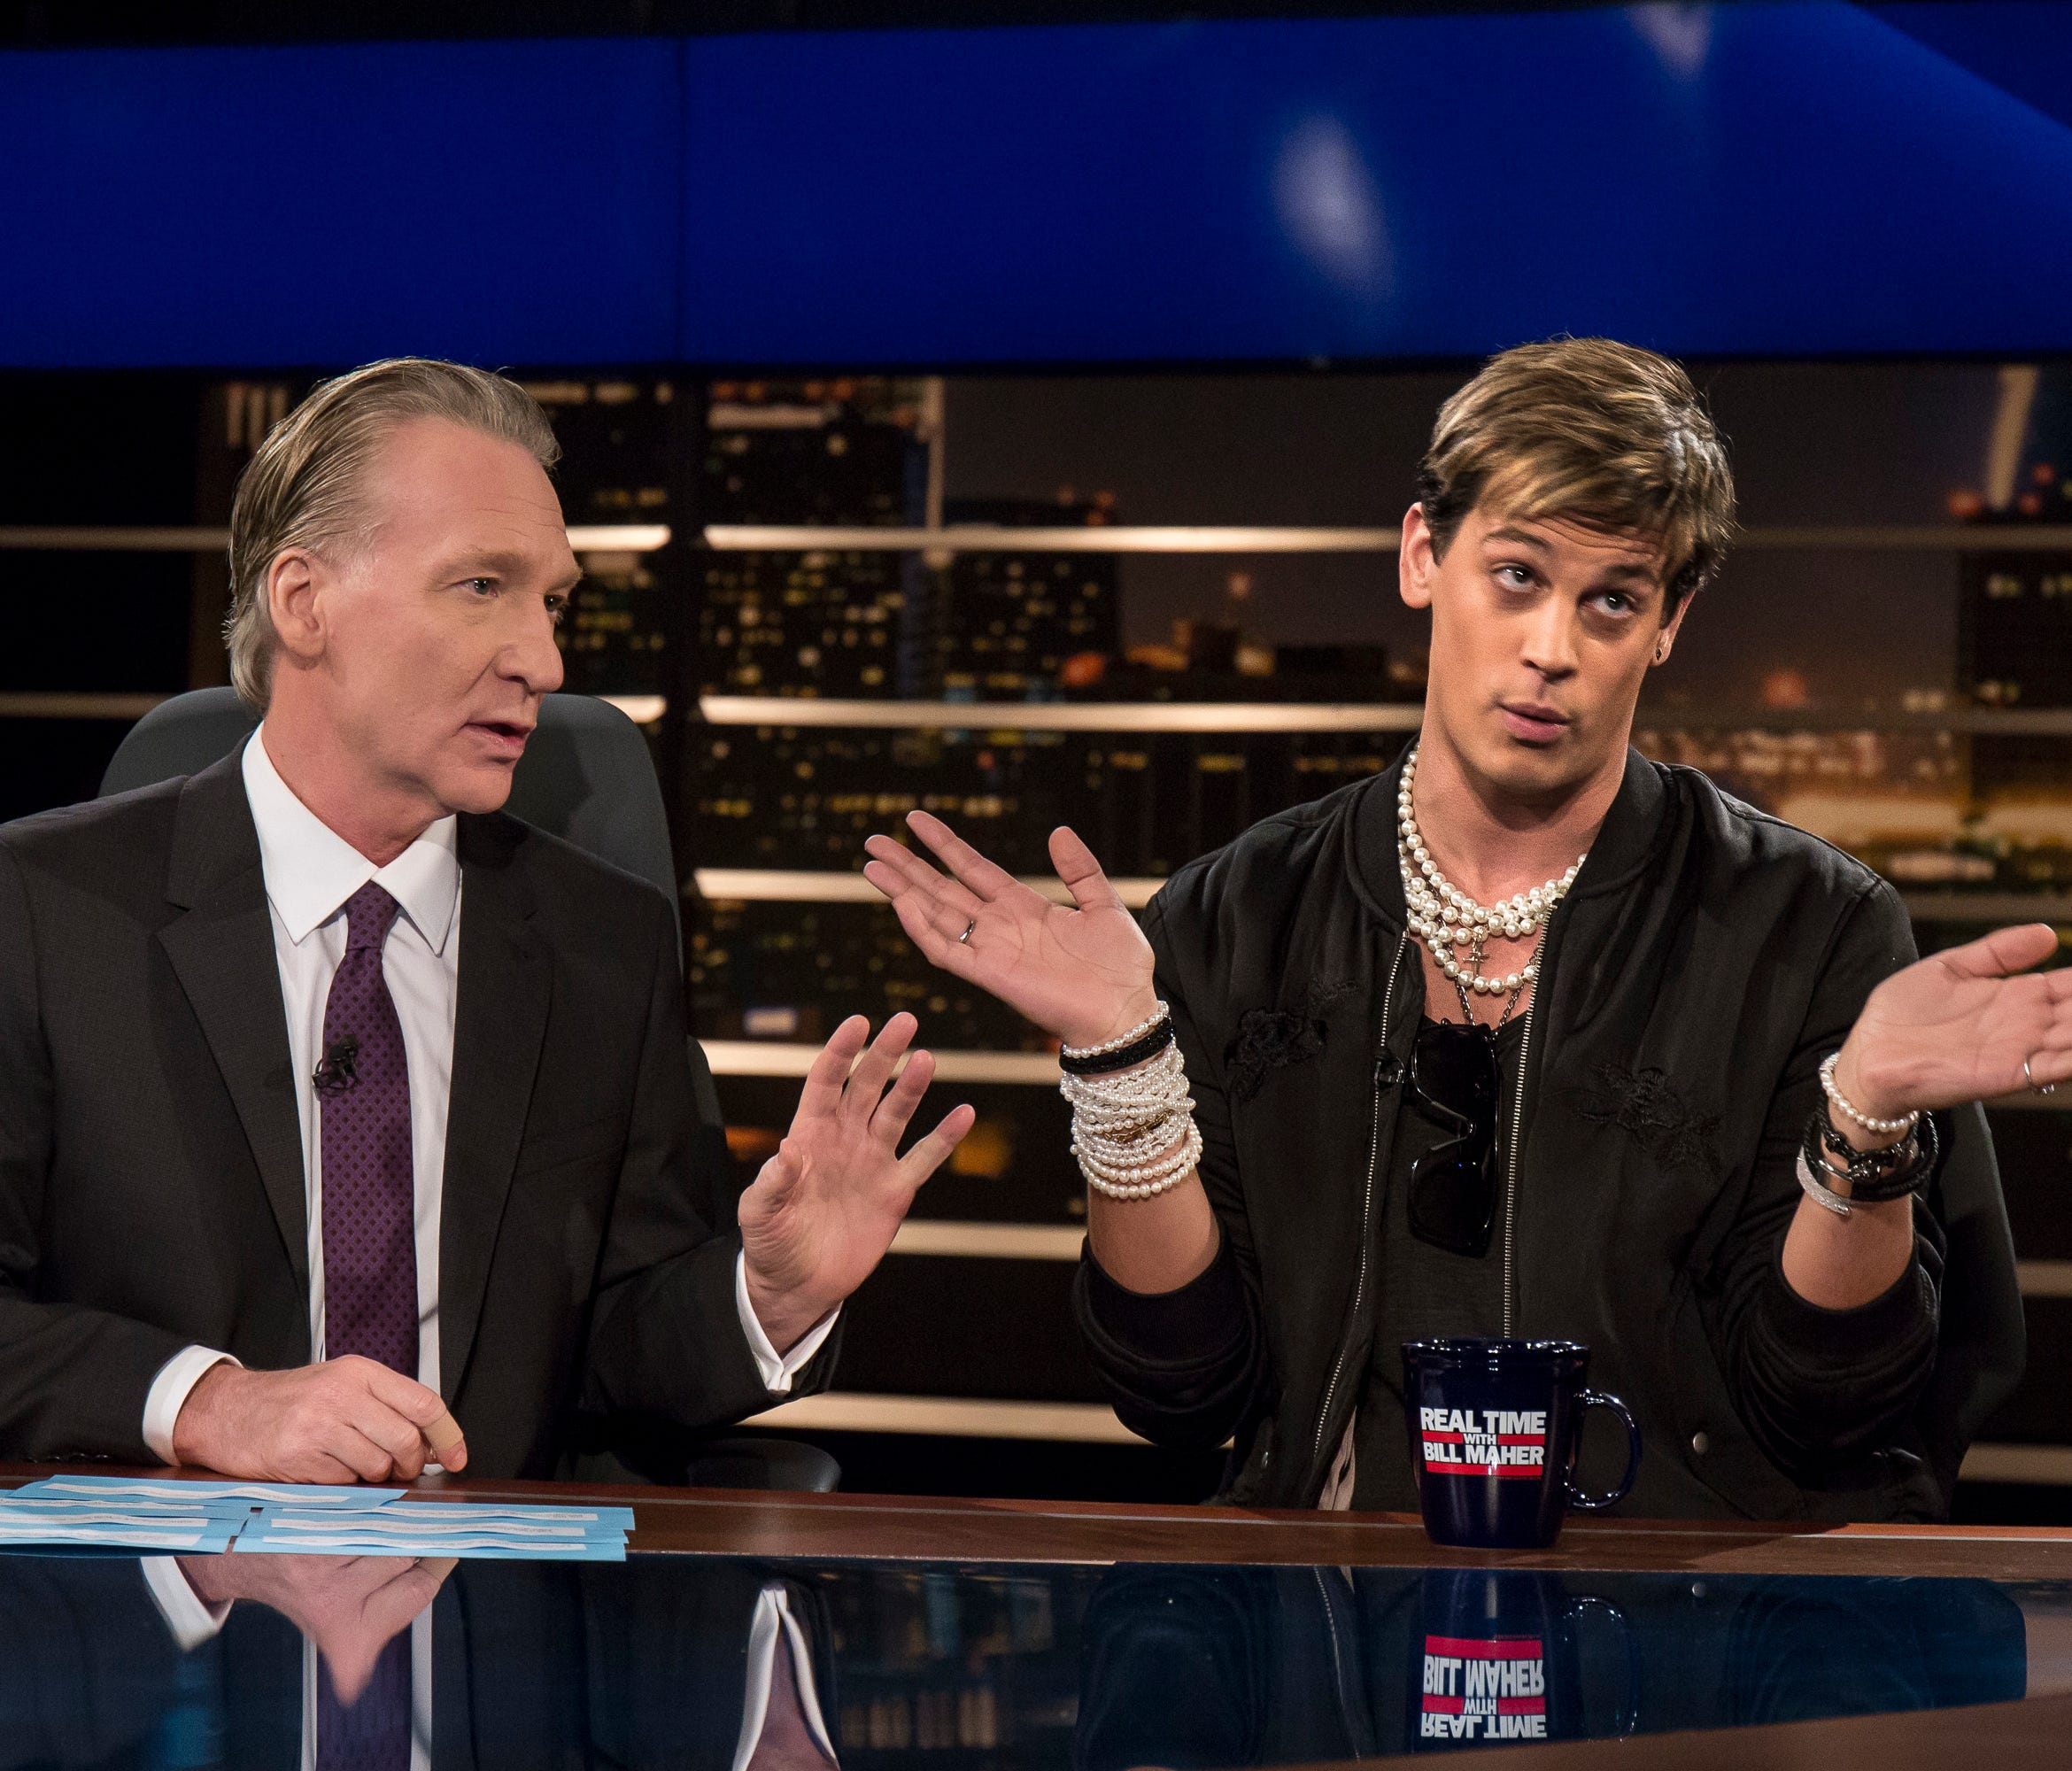 Bill Maher, and Breitbart News' Milo Yiannopoulos on HBO's 'Real Time with Bill Maher,' Feb. 17, 2017, in Los Angeles.